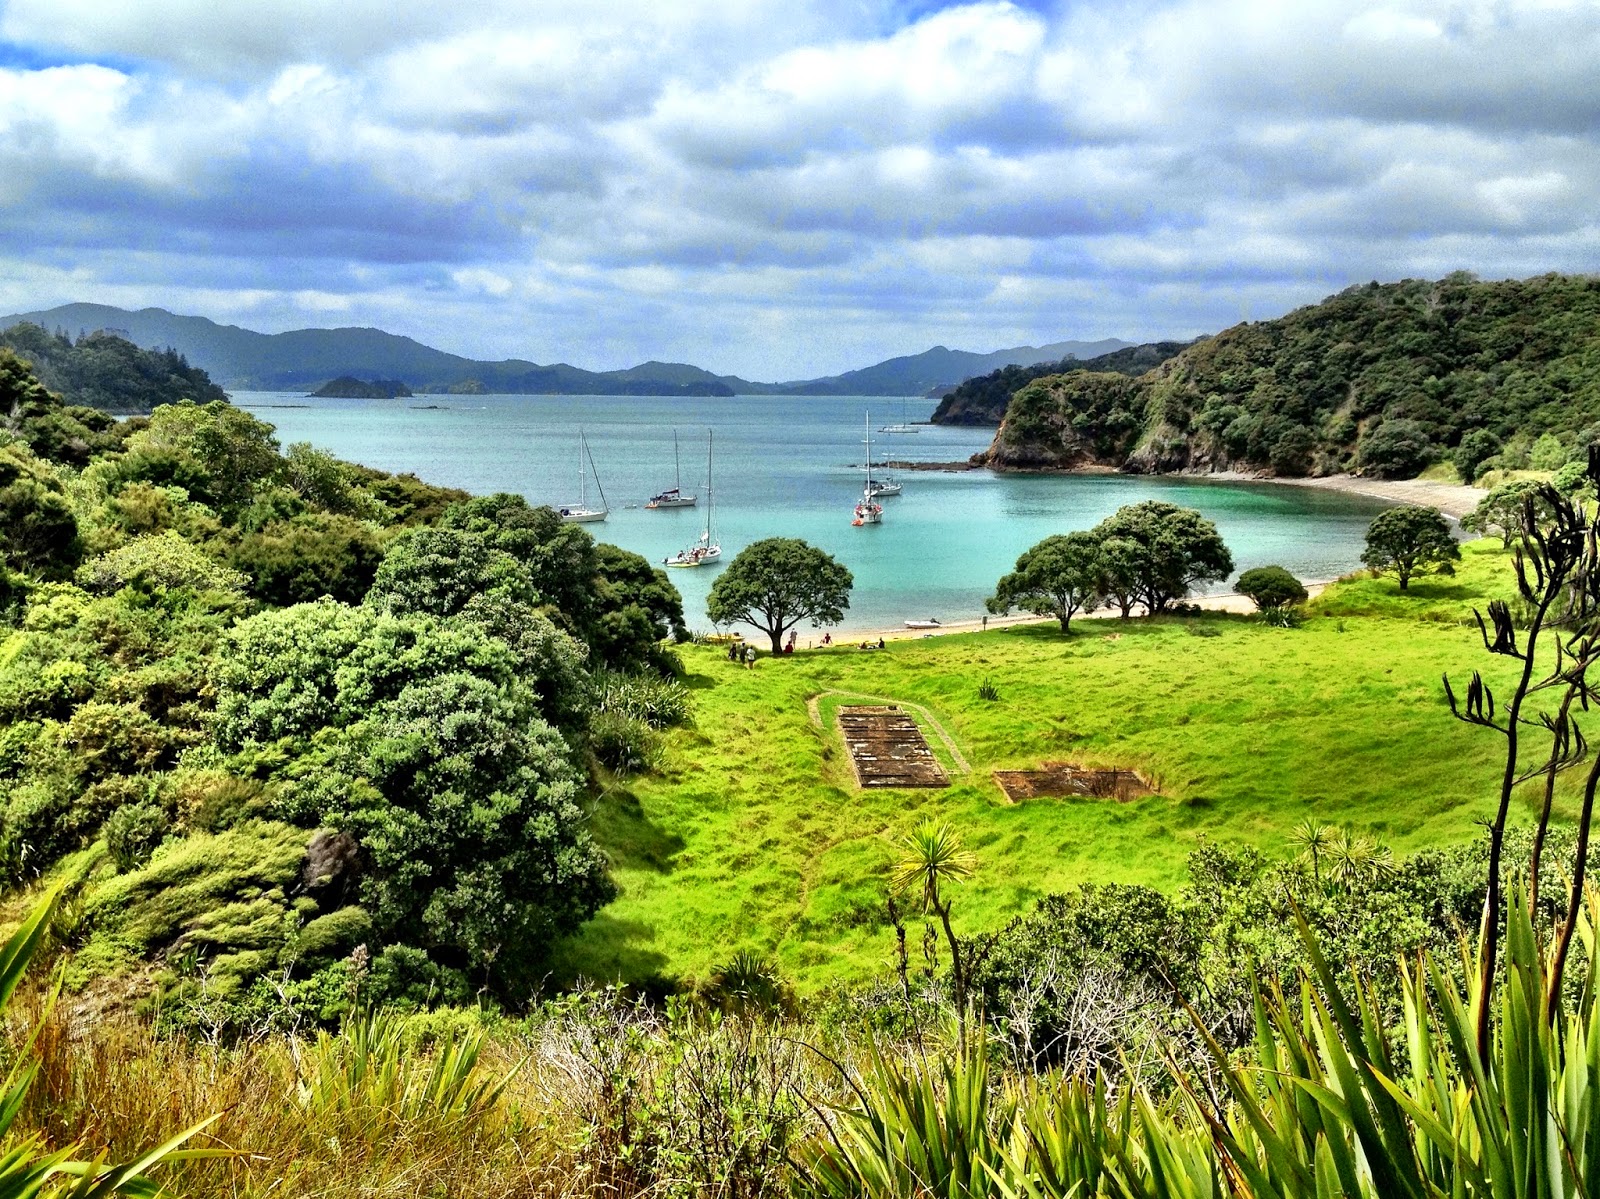 Scenery in the Bay of Islands